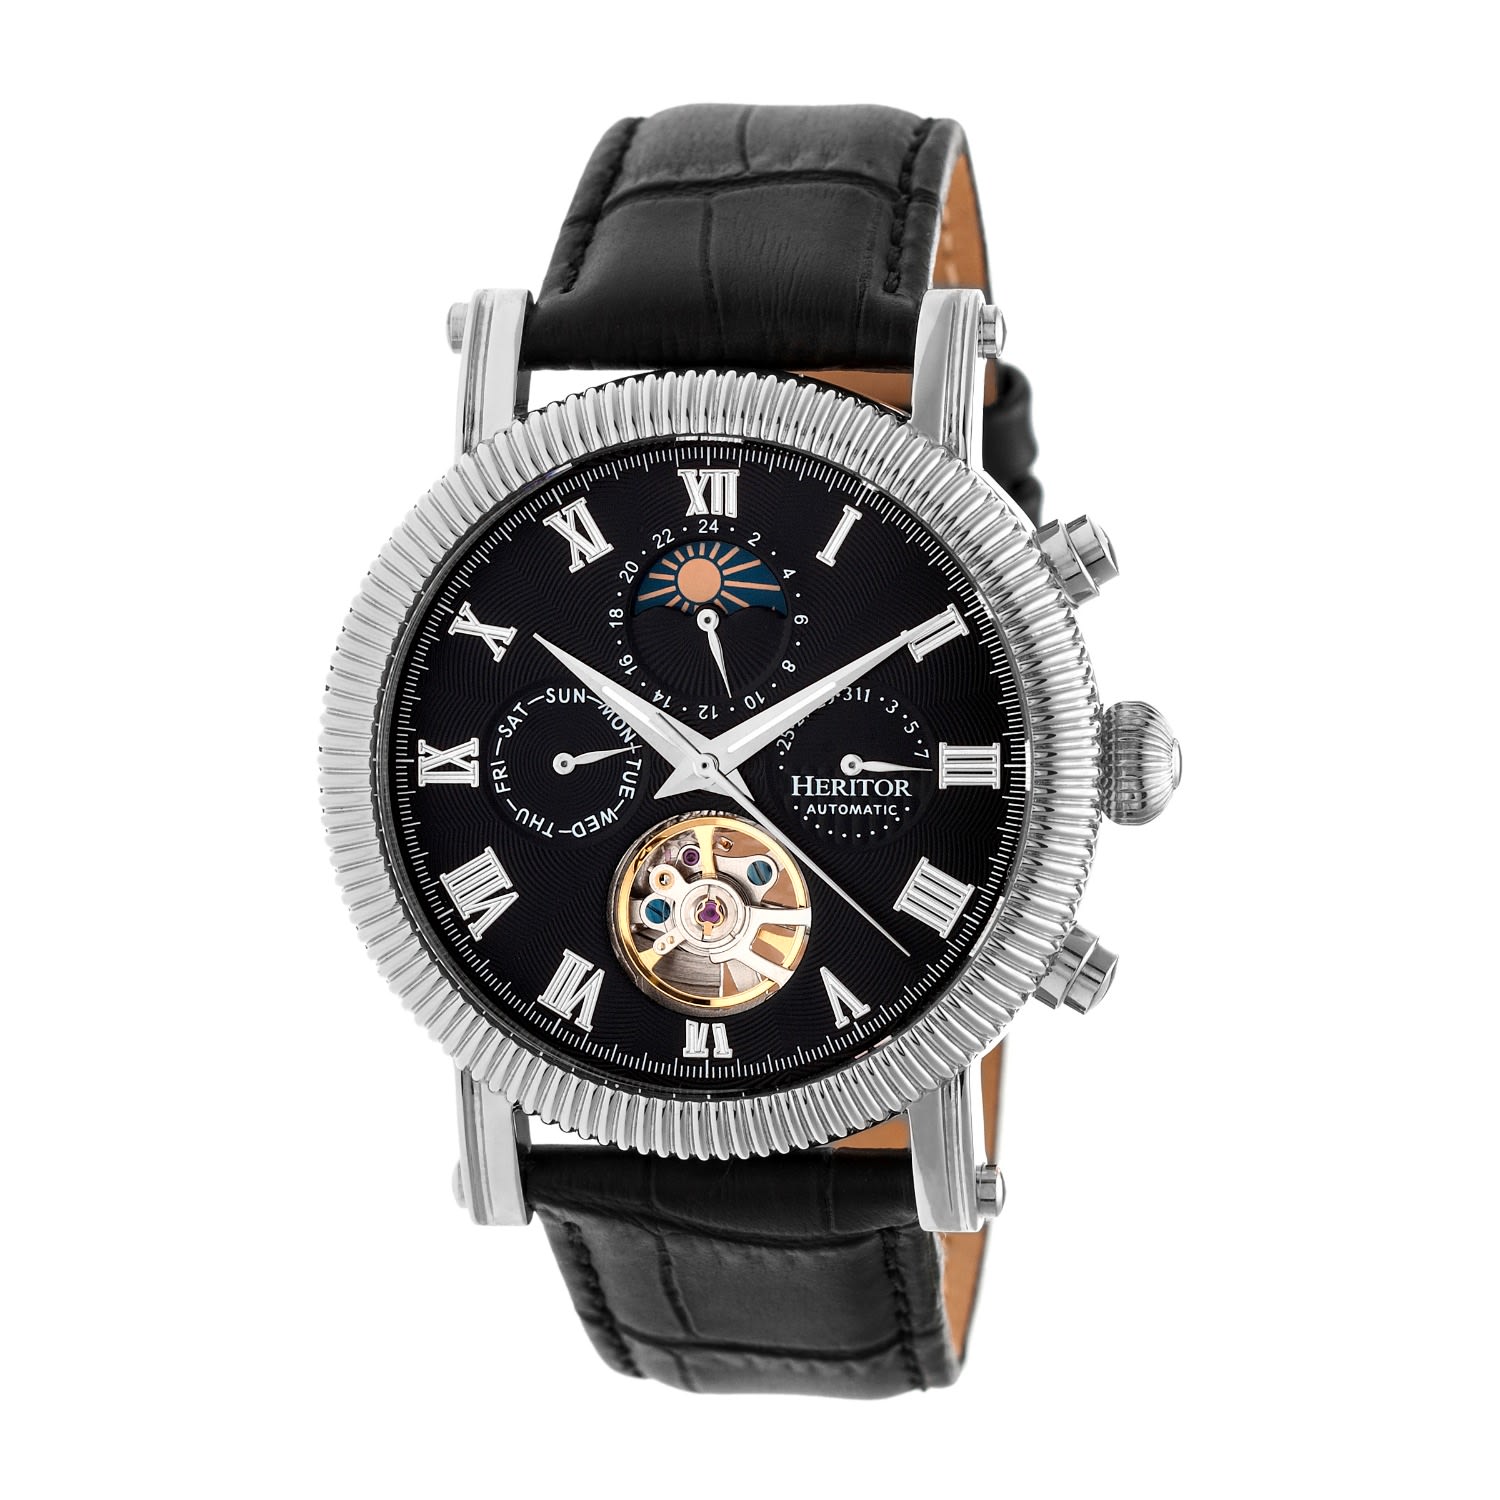 Men’s Silver / Black Winston Semi-Skeleton Leather-Band Watch With Day And Date - Black, Silver One Size Heritor Automatic